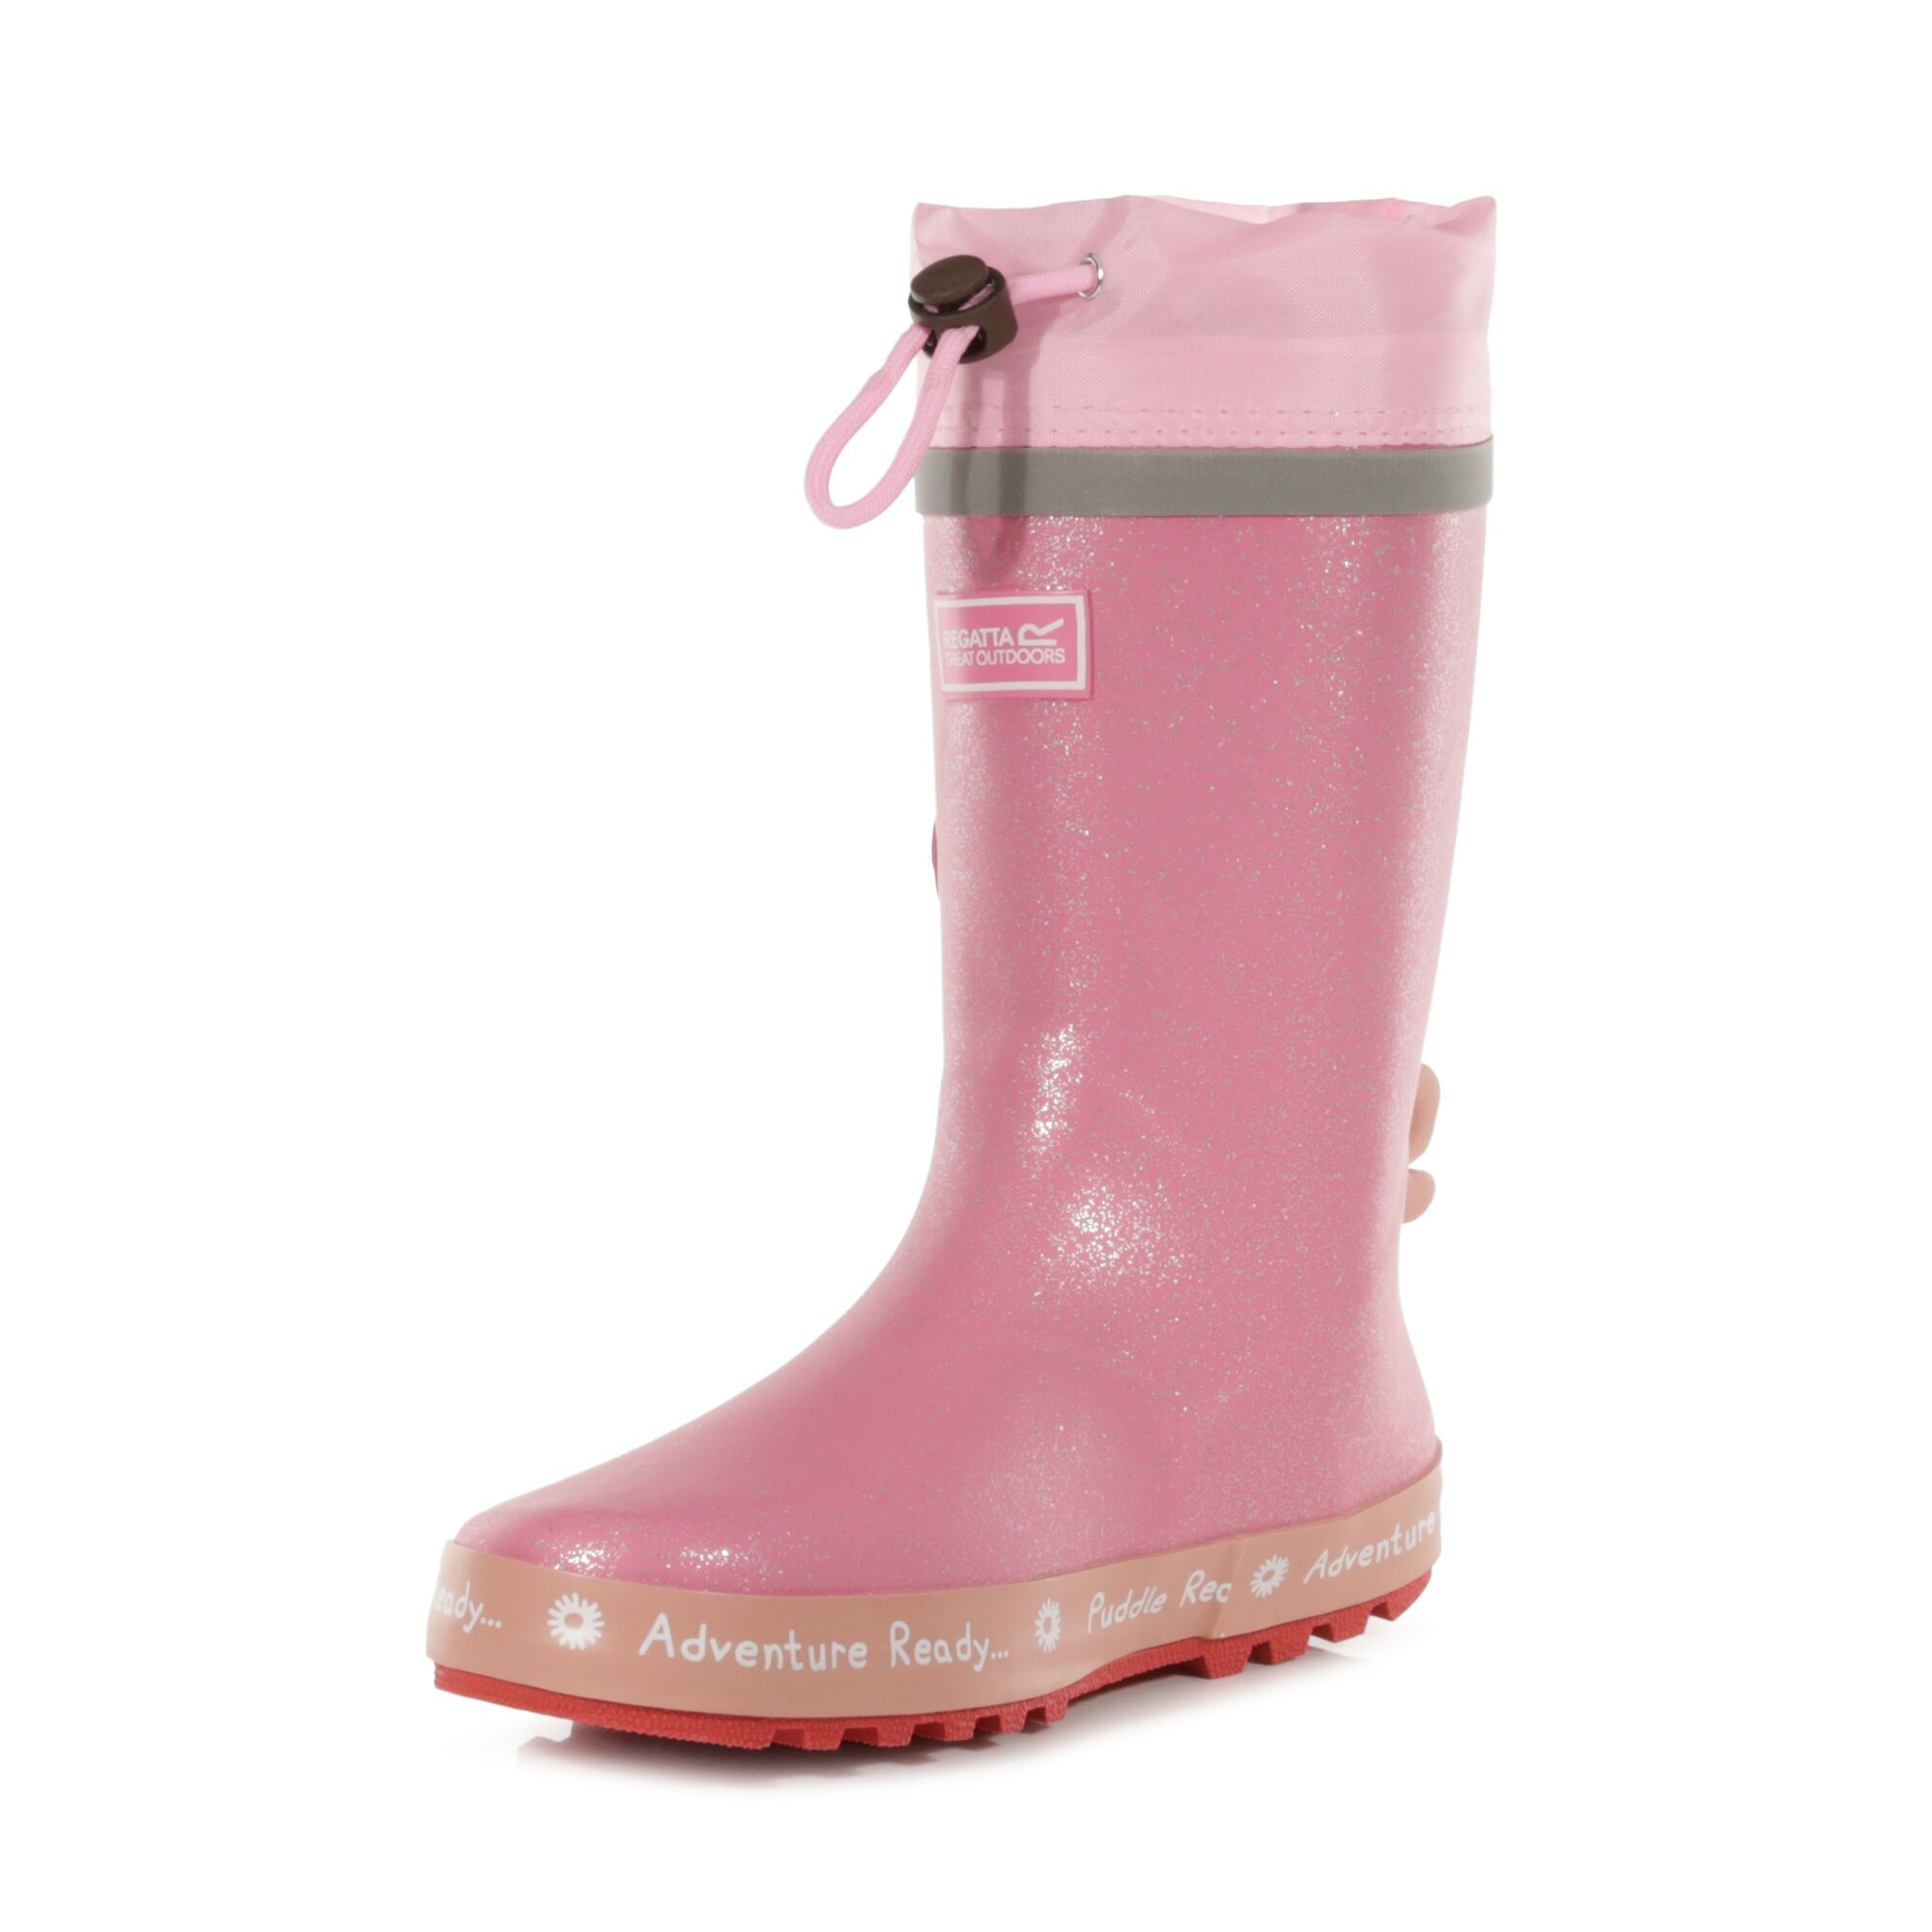 Outdoor Shoes -  regatta Peppa Pig Puddle Wellies